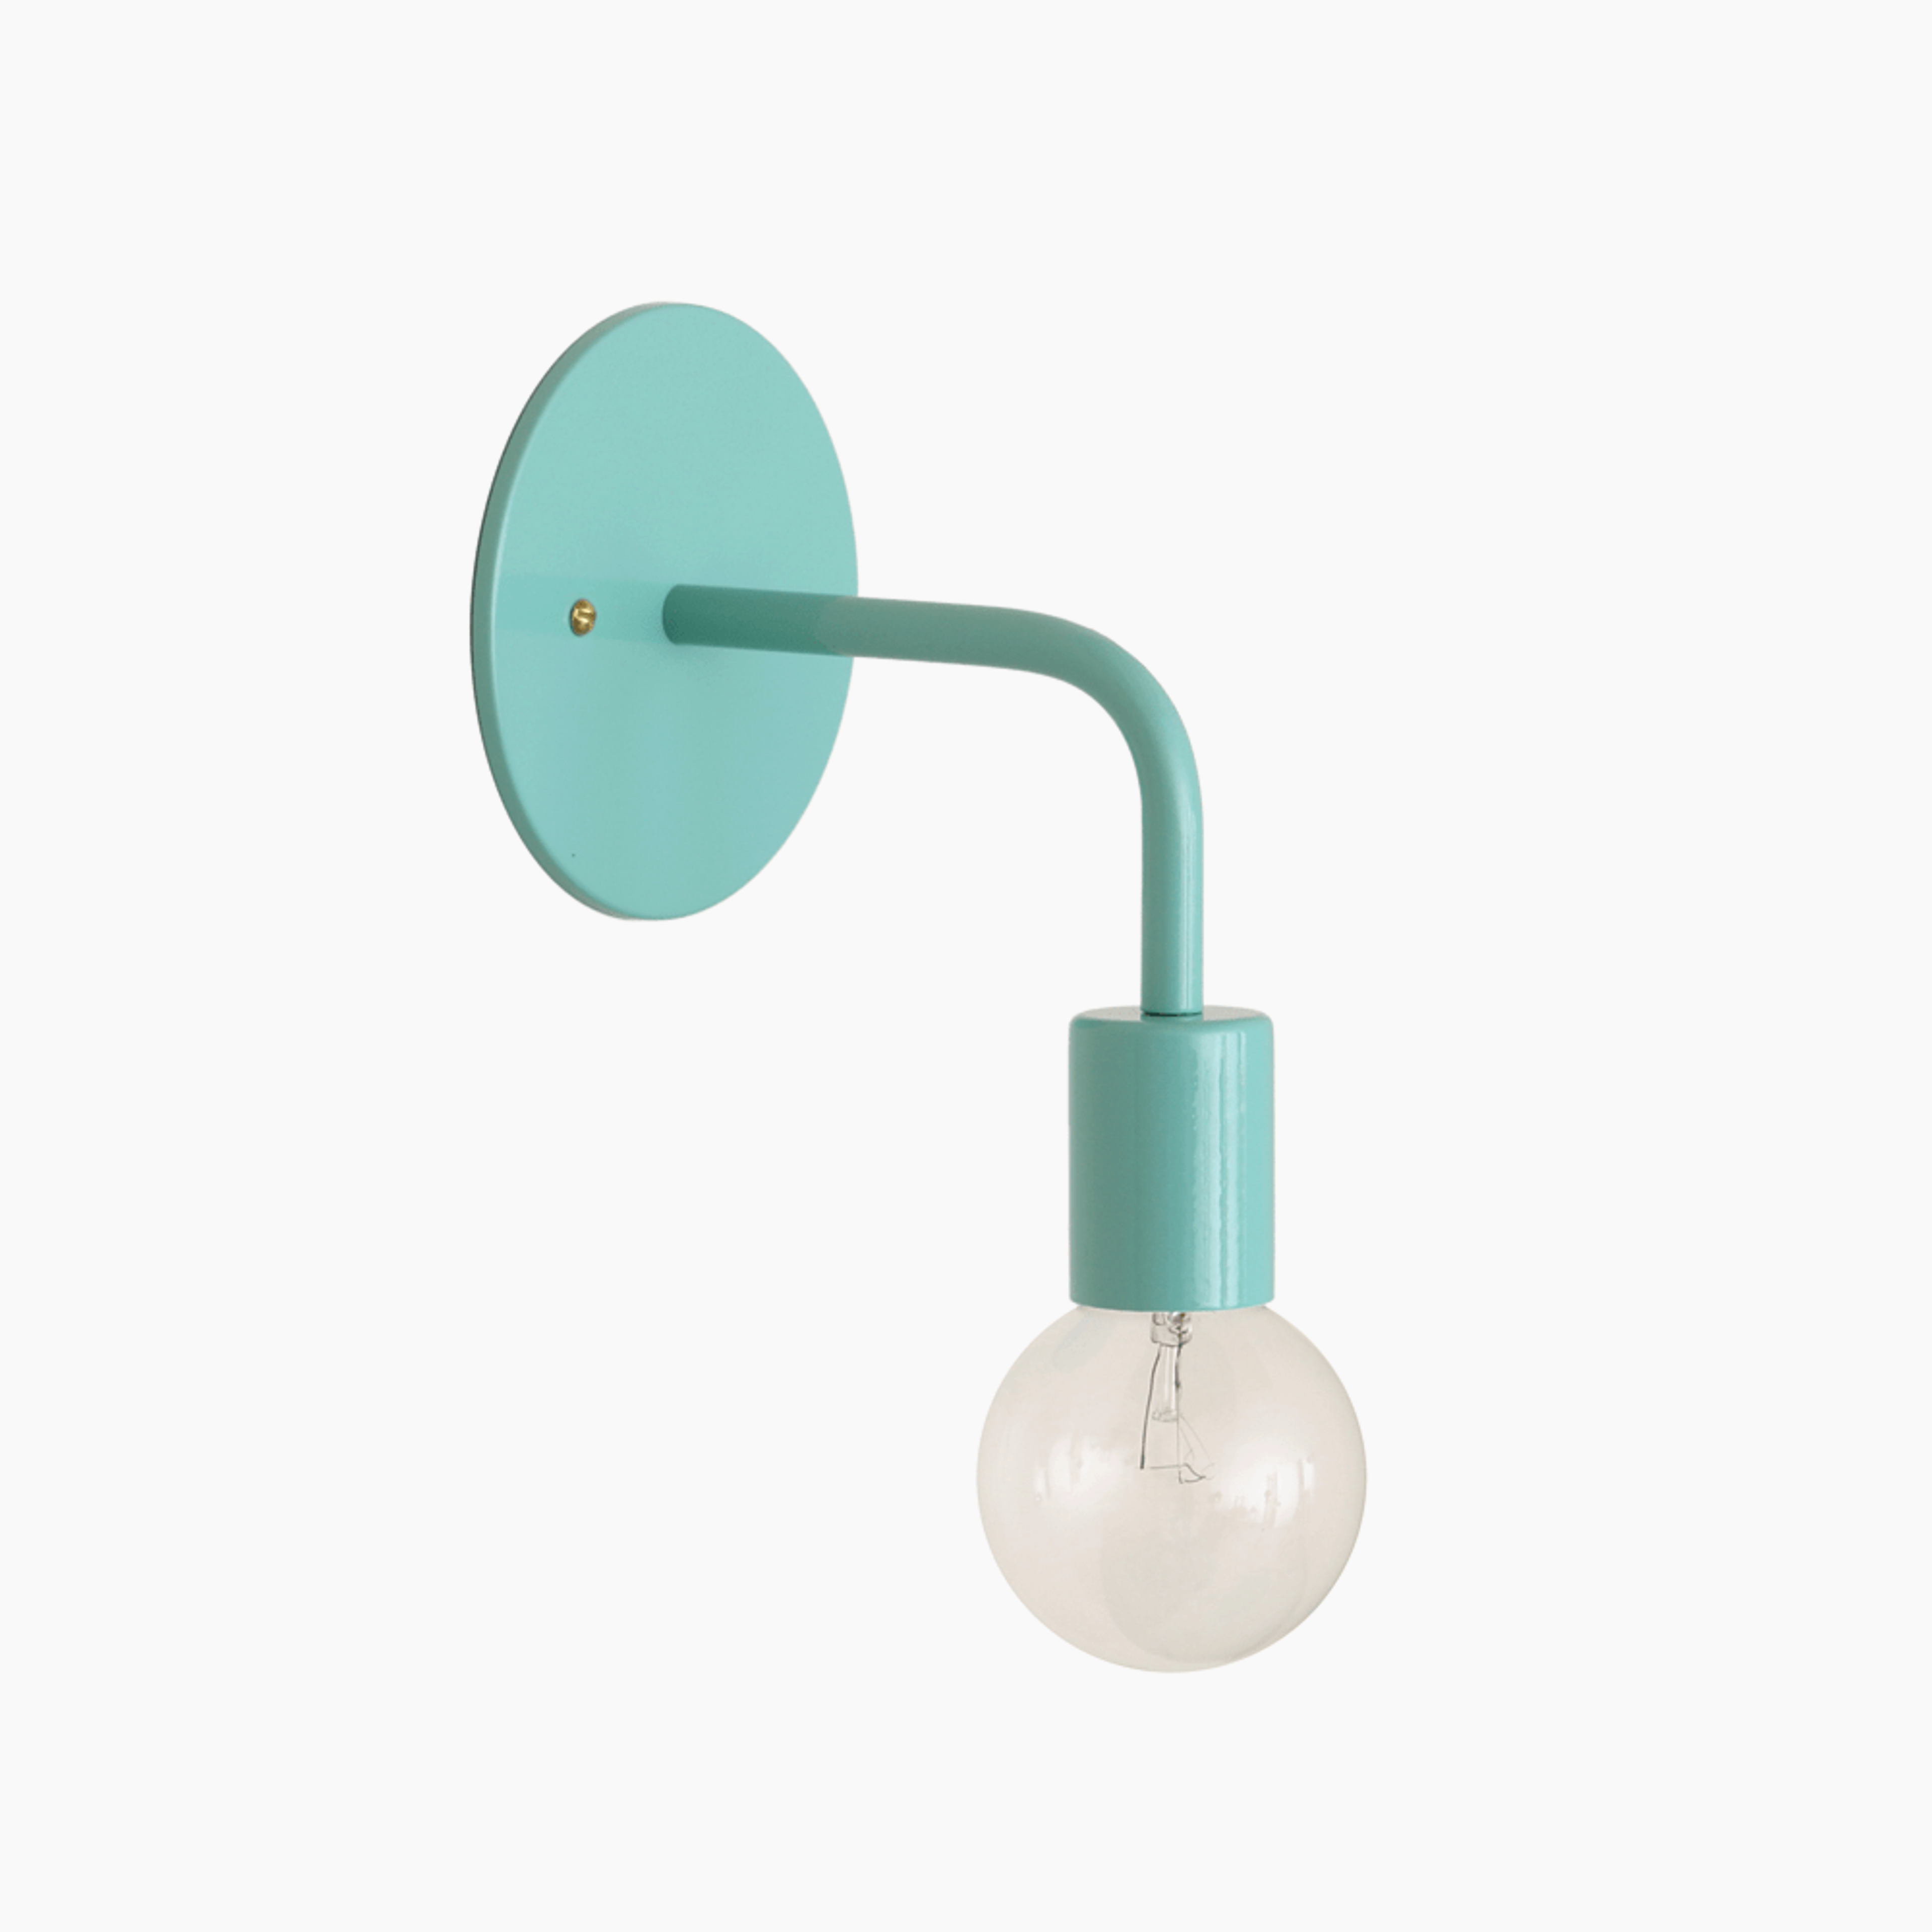 Wall sconce: solid color